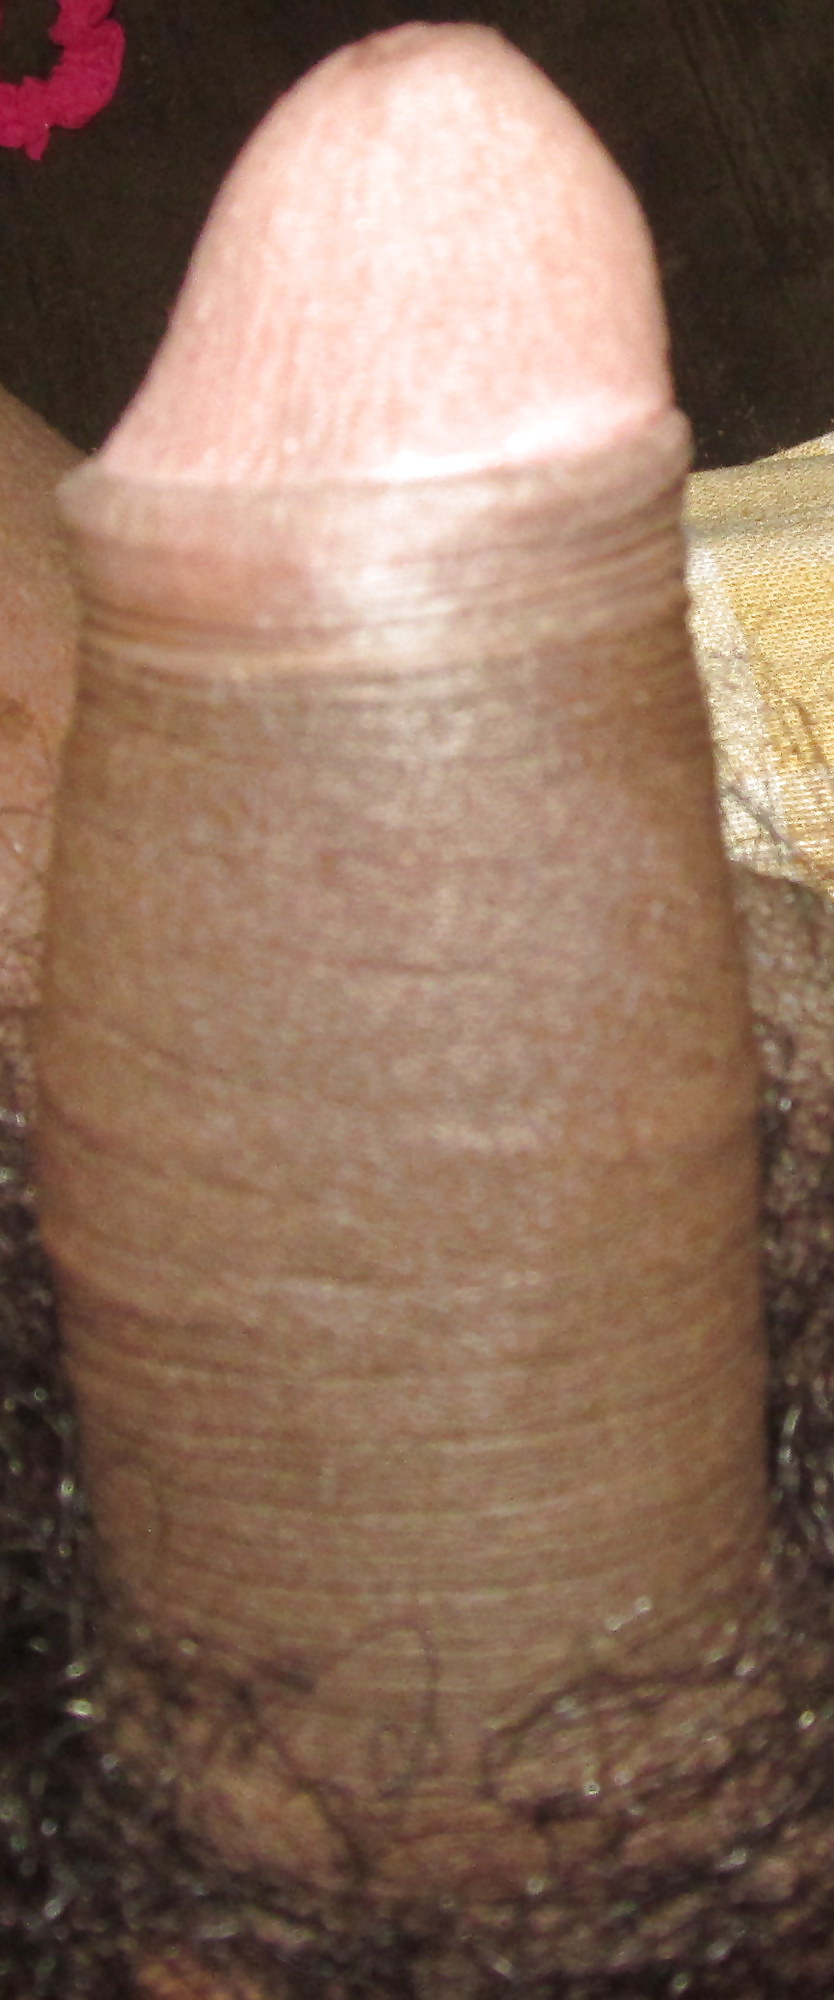 My Cock, Please Feel Free To Comment #16239492